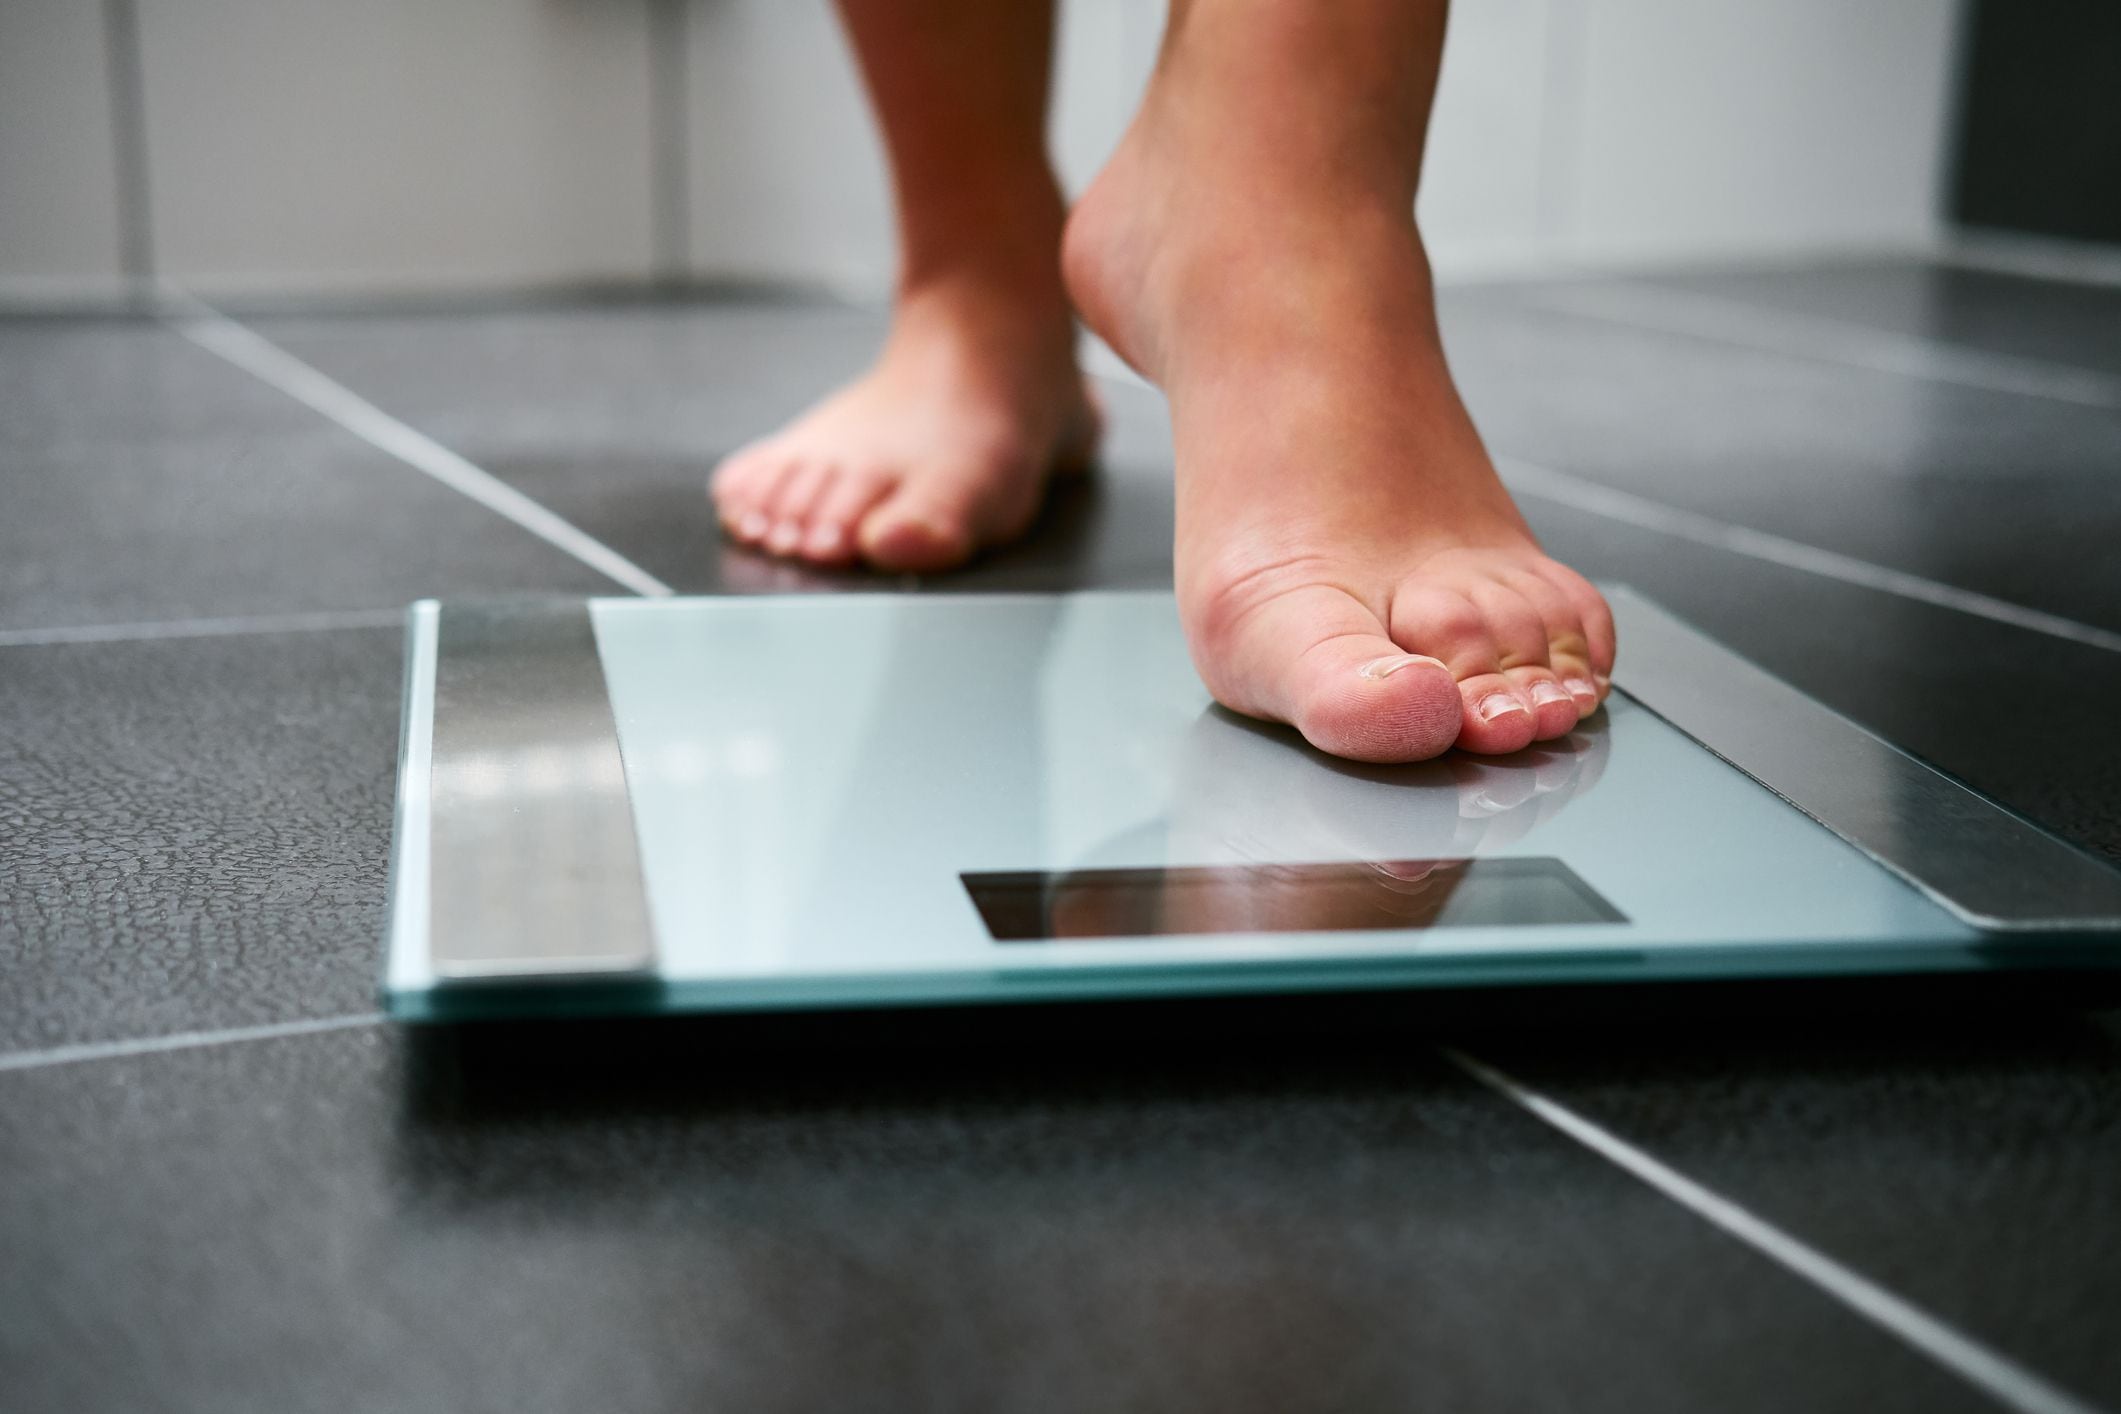 Consumer Reports: Bathroom scales and when to weigh yourself